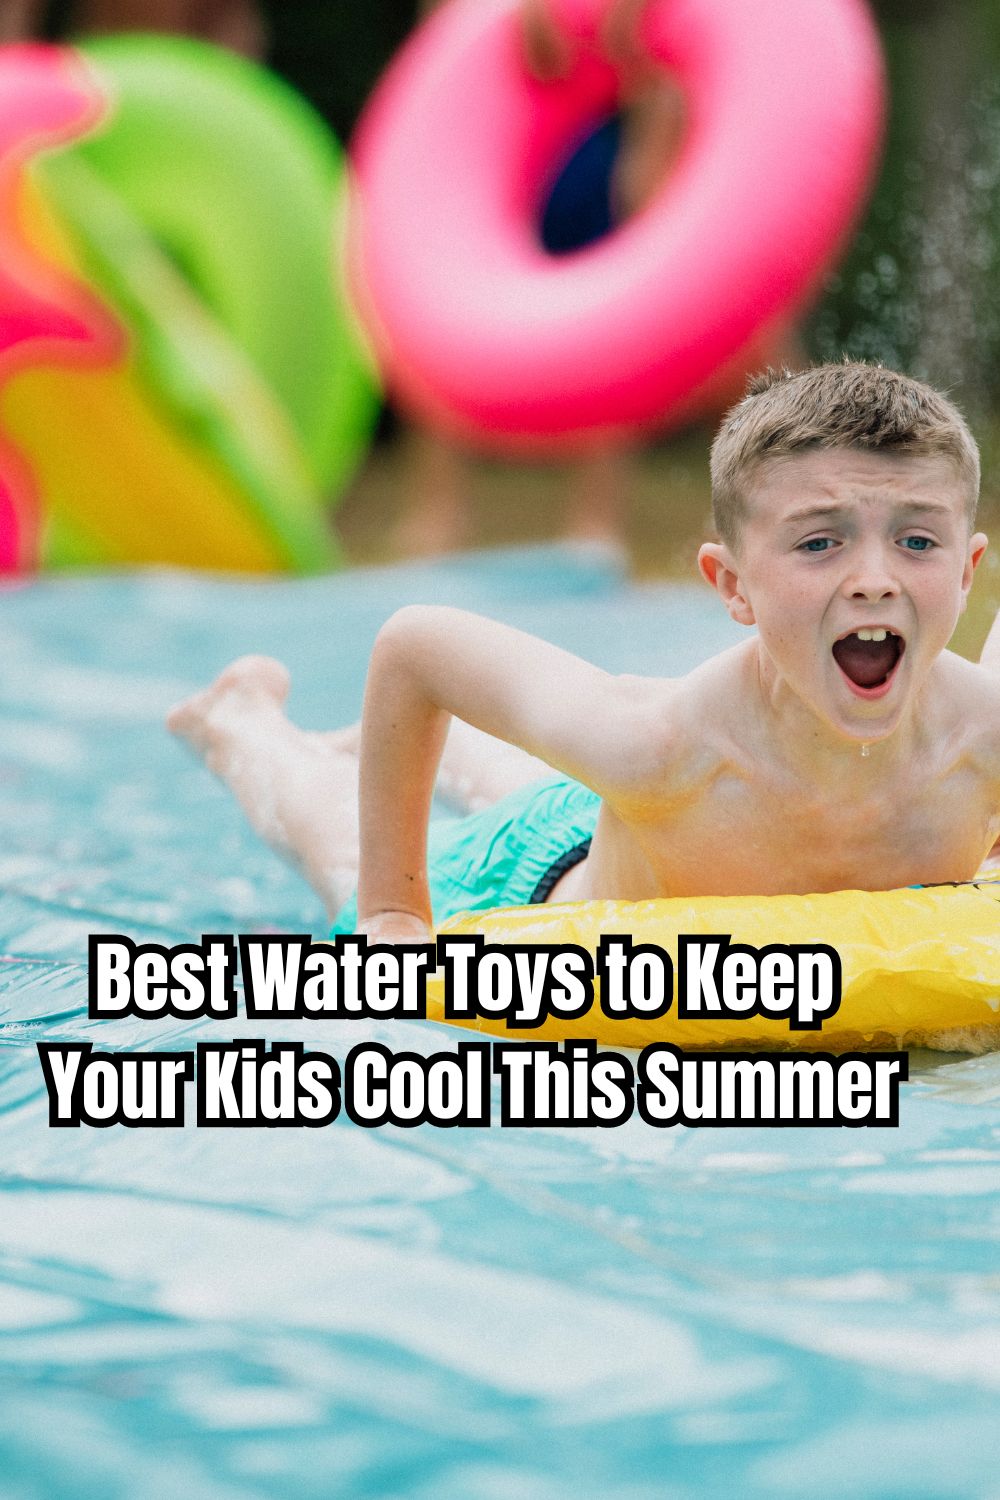 Best Water Toys to Keep your kids Cool this summer